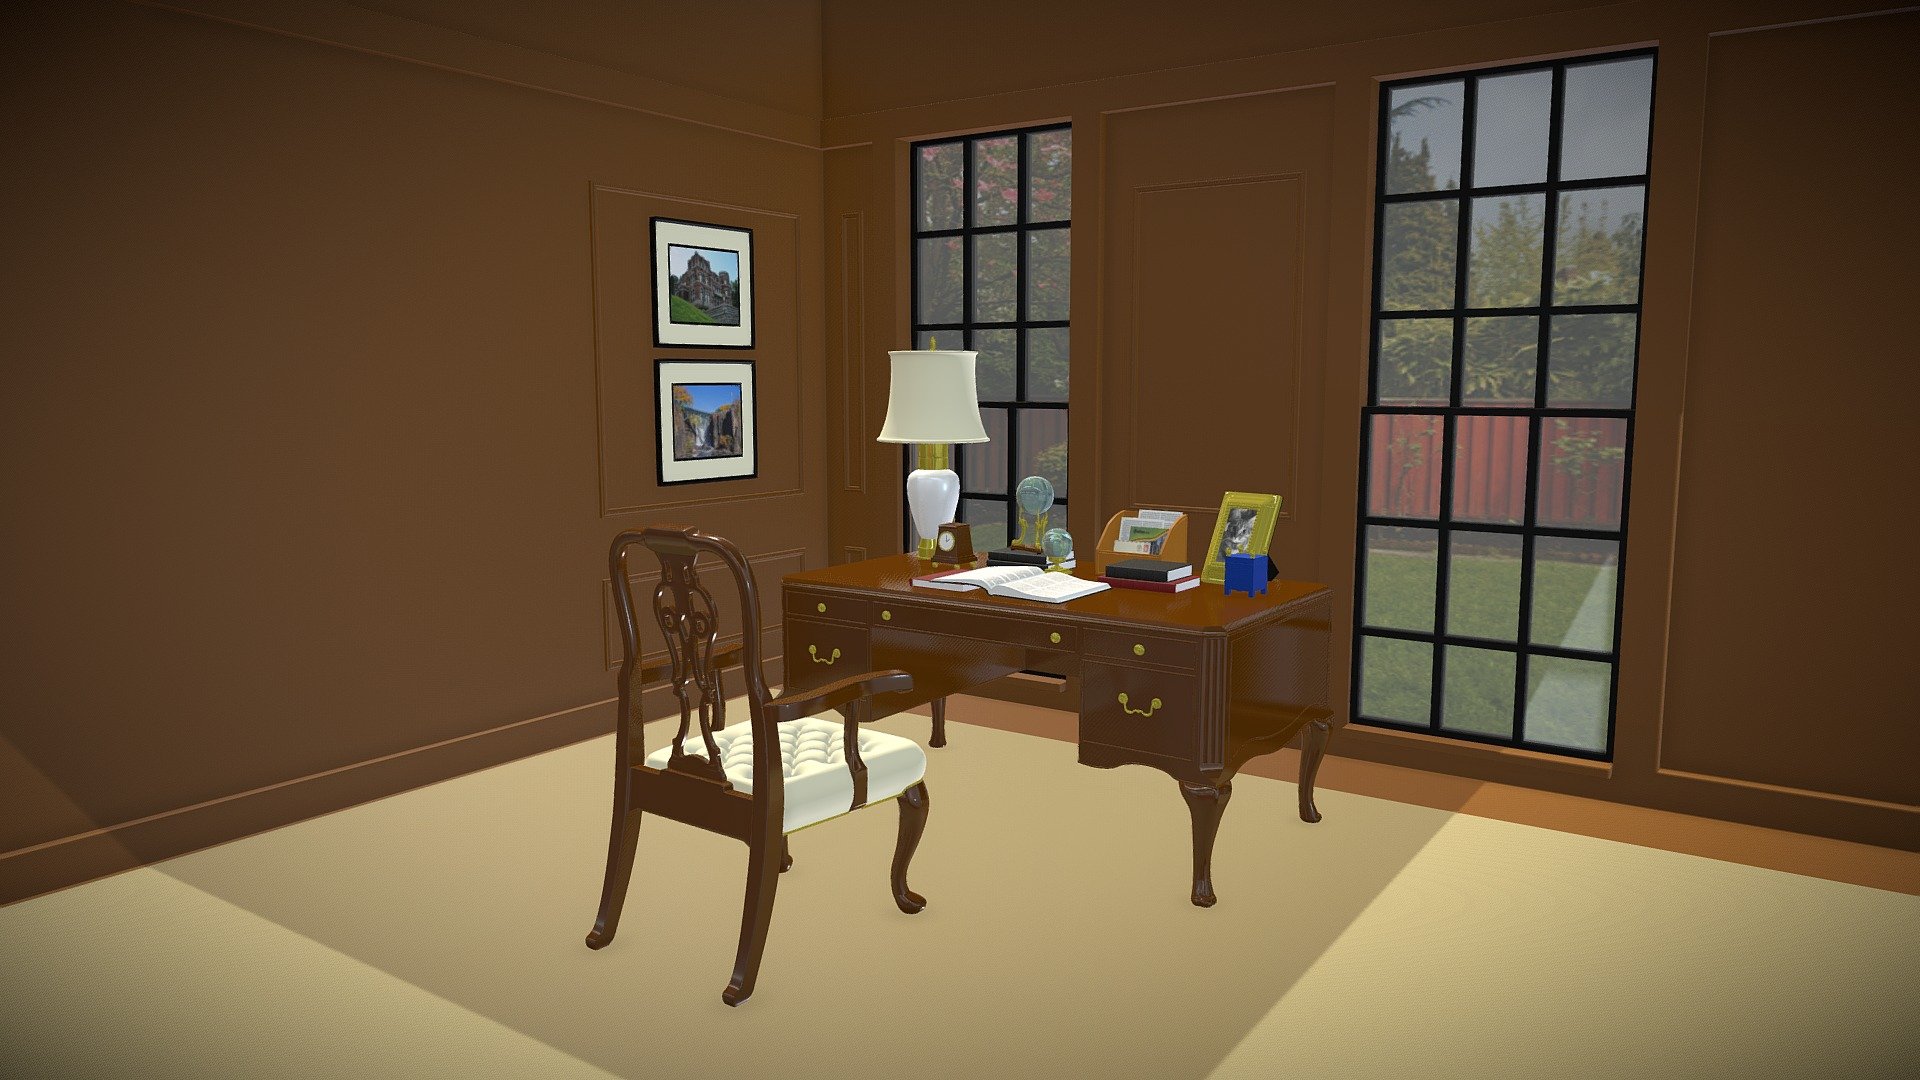 A simple, yet classy office setting with antique victorian style furniture modeled in Autodesk Maya 3d model